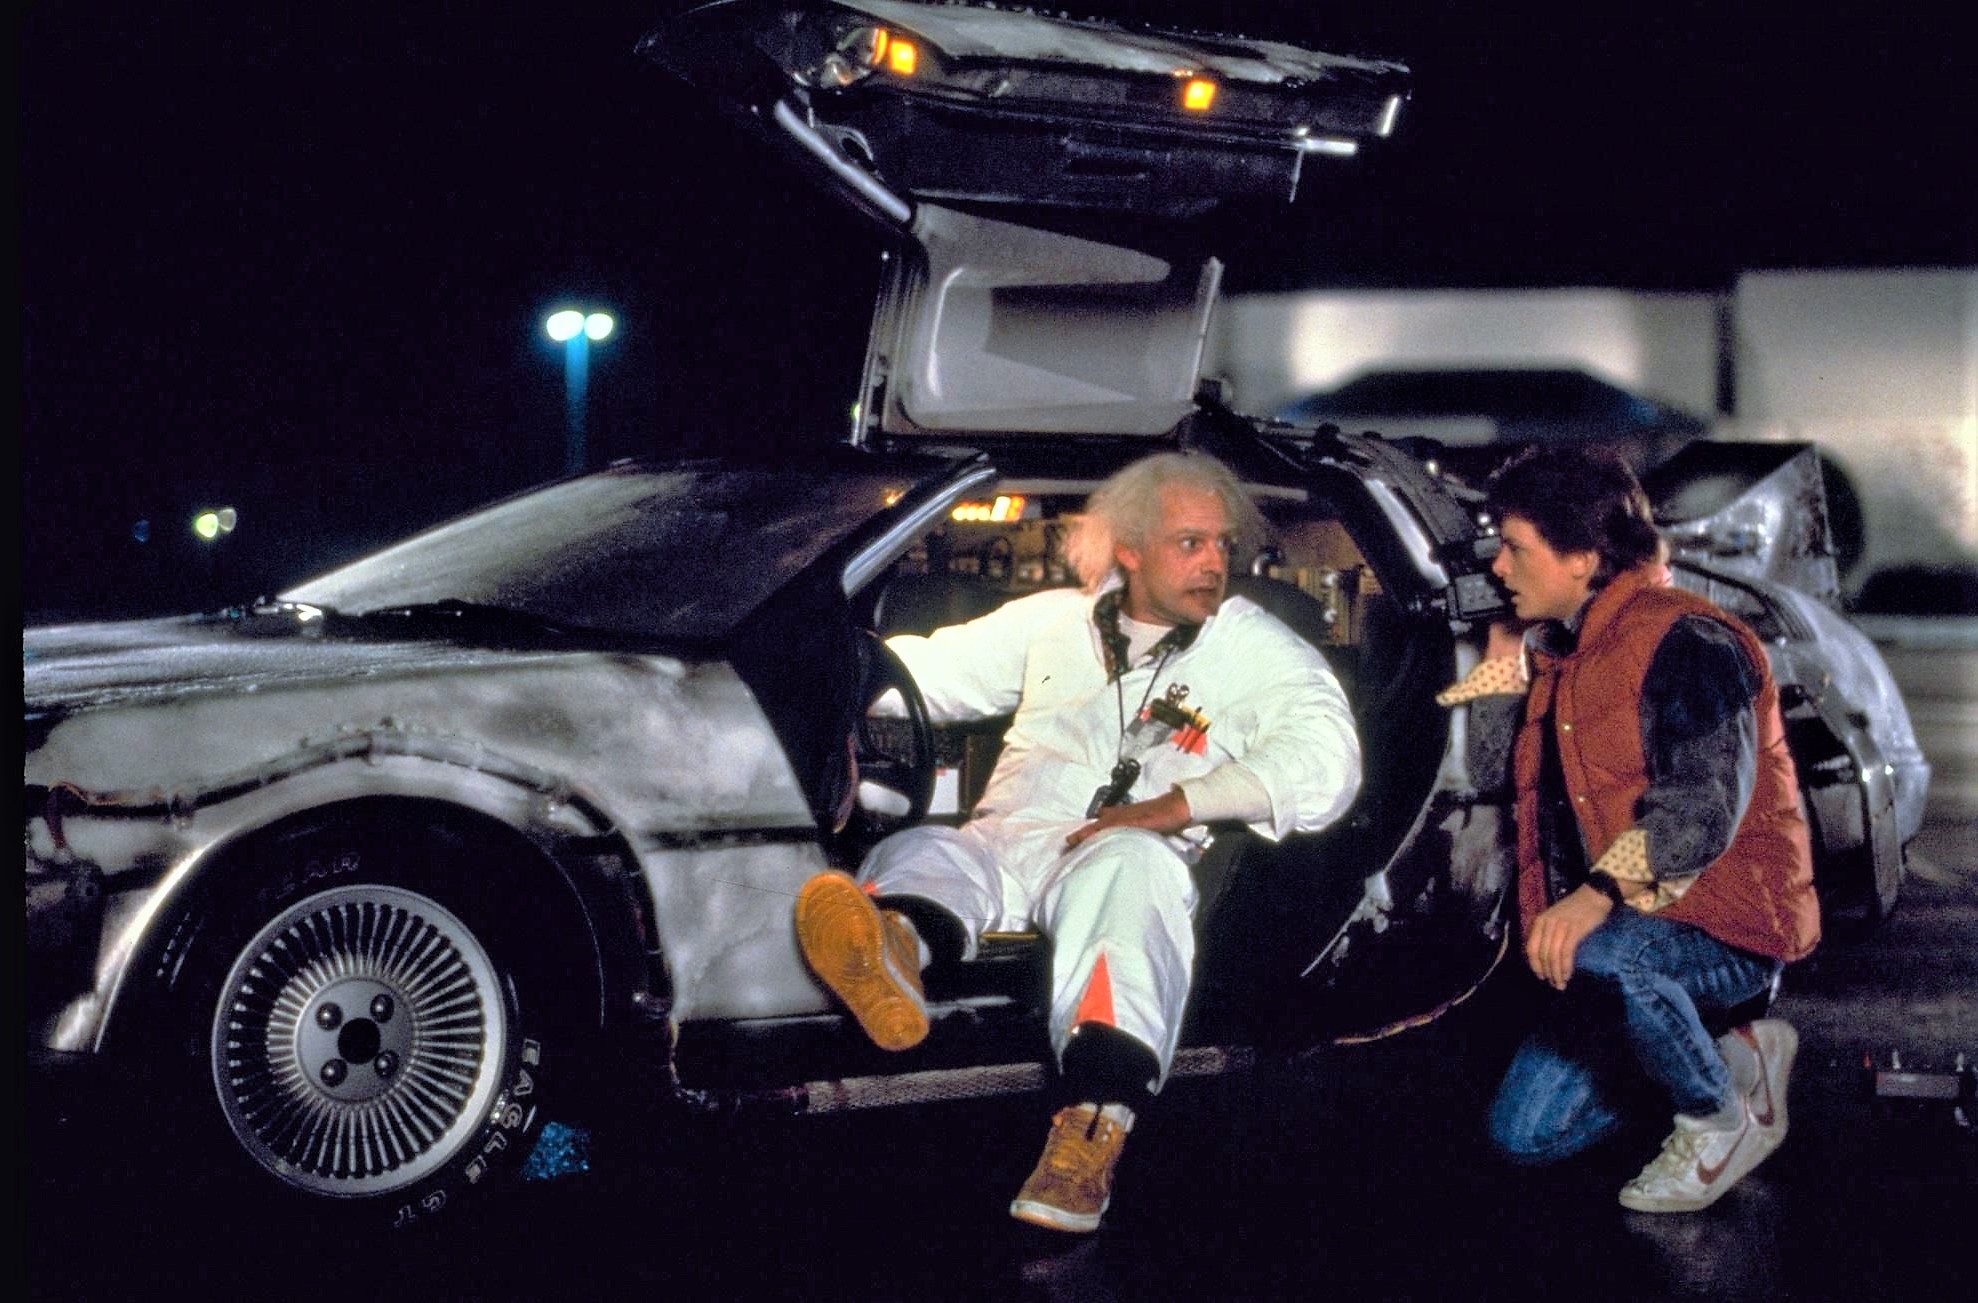 Back to the Future, DeLorean widow sues for royalties from ‘Back to the Future’ films, ClassicCars.com Journal